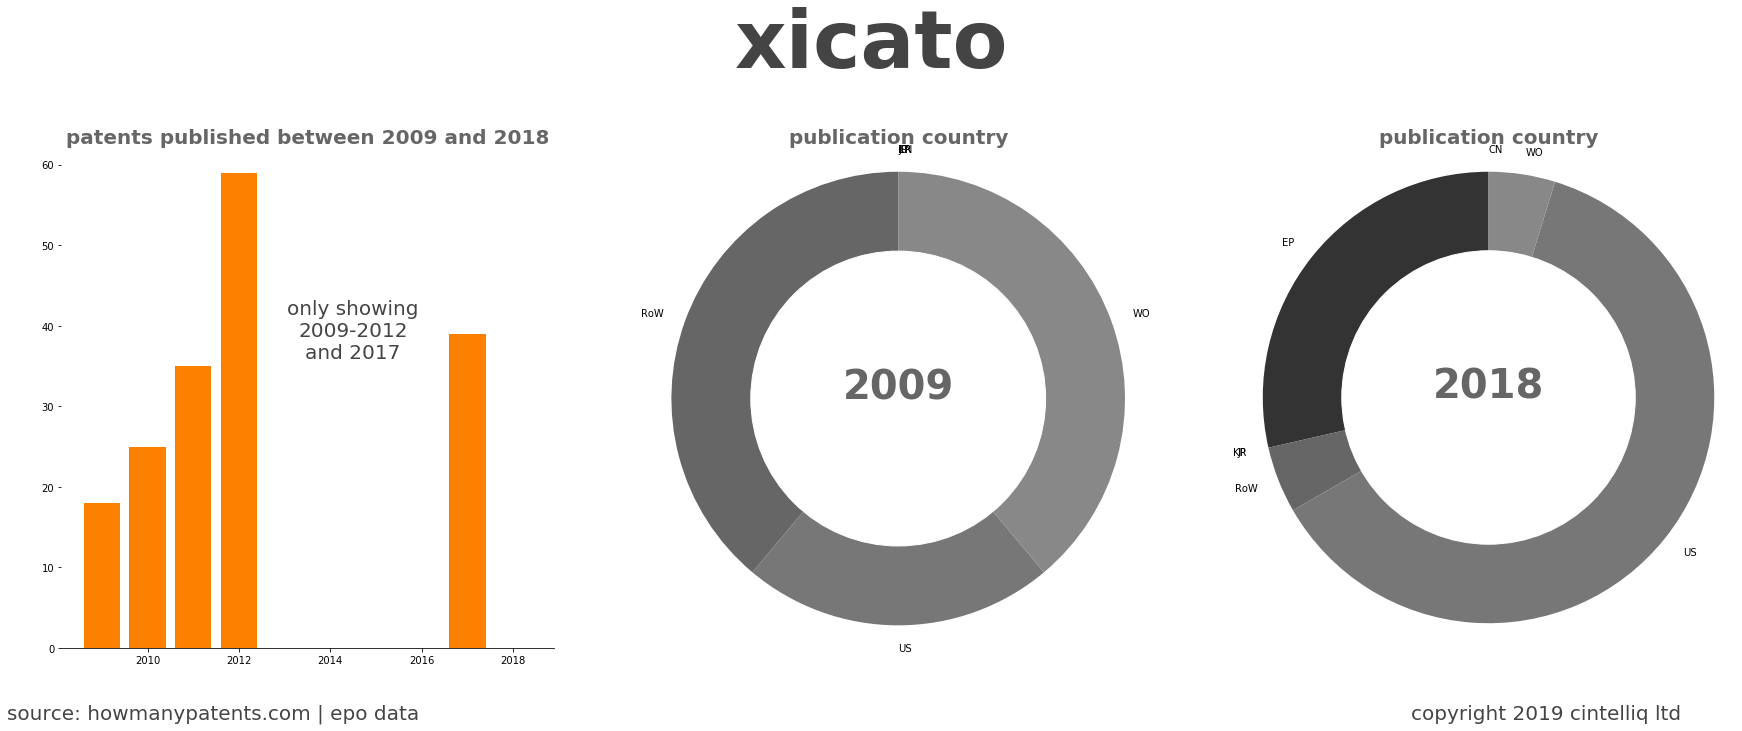 summary of patents for Xicato